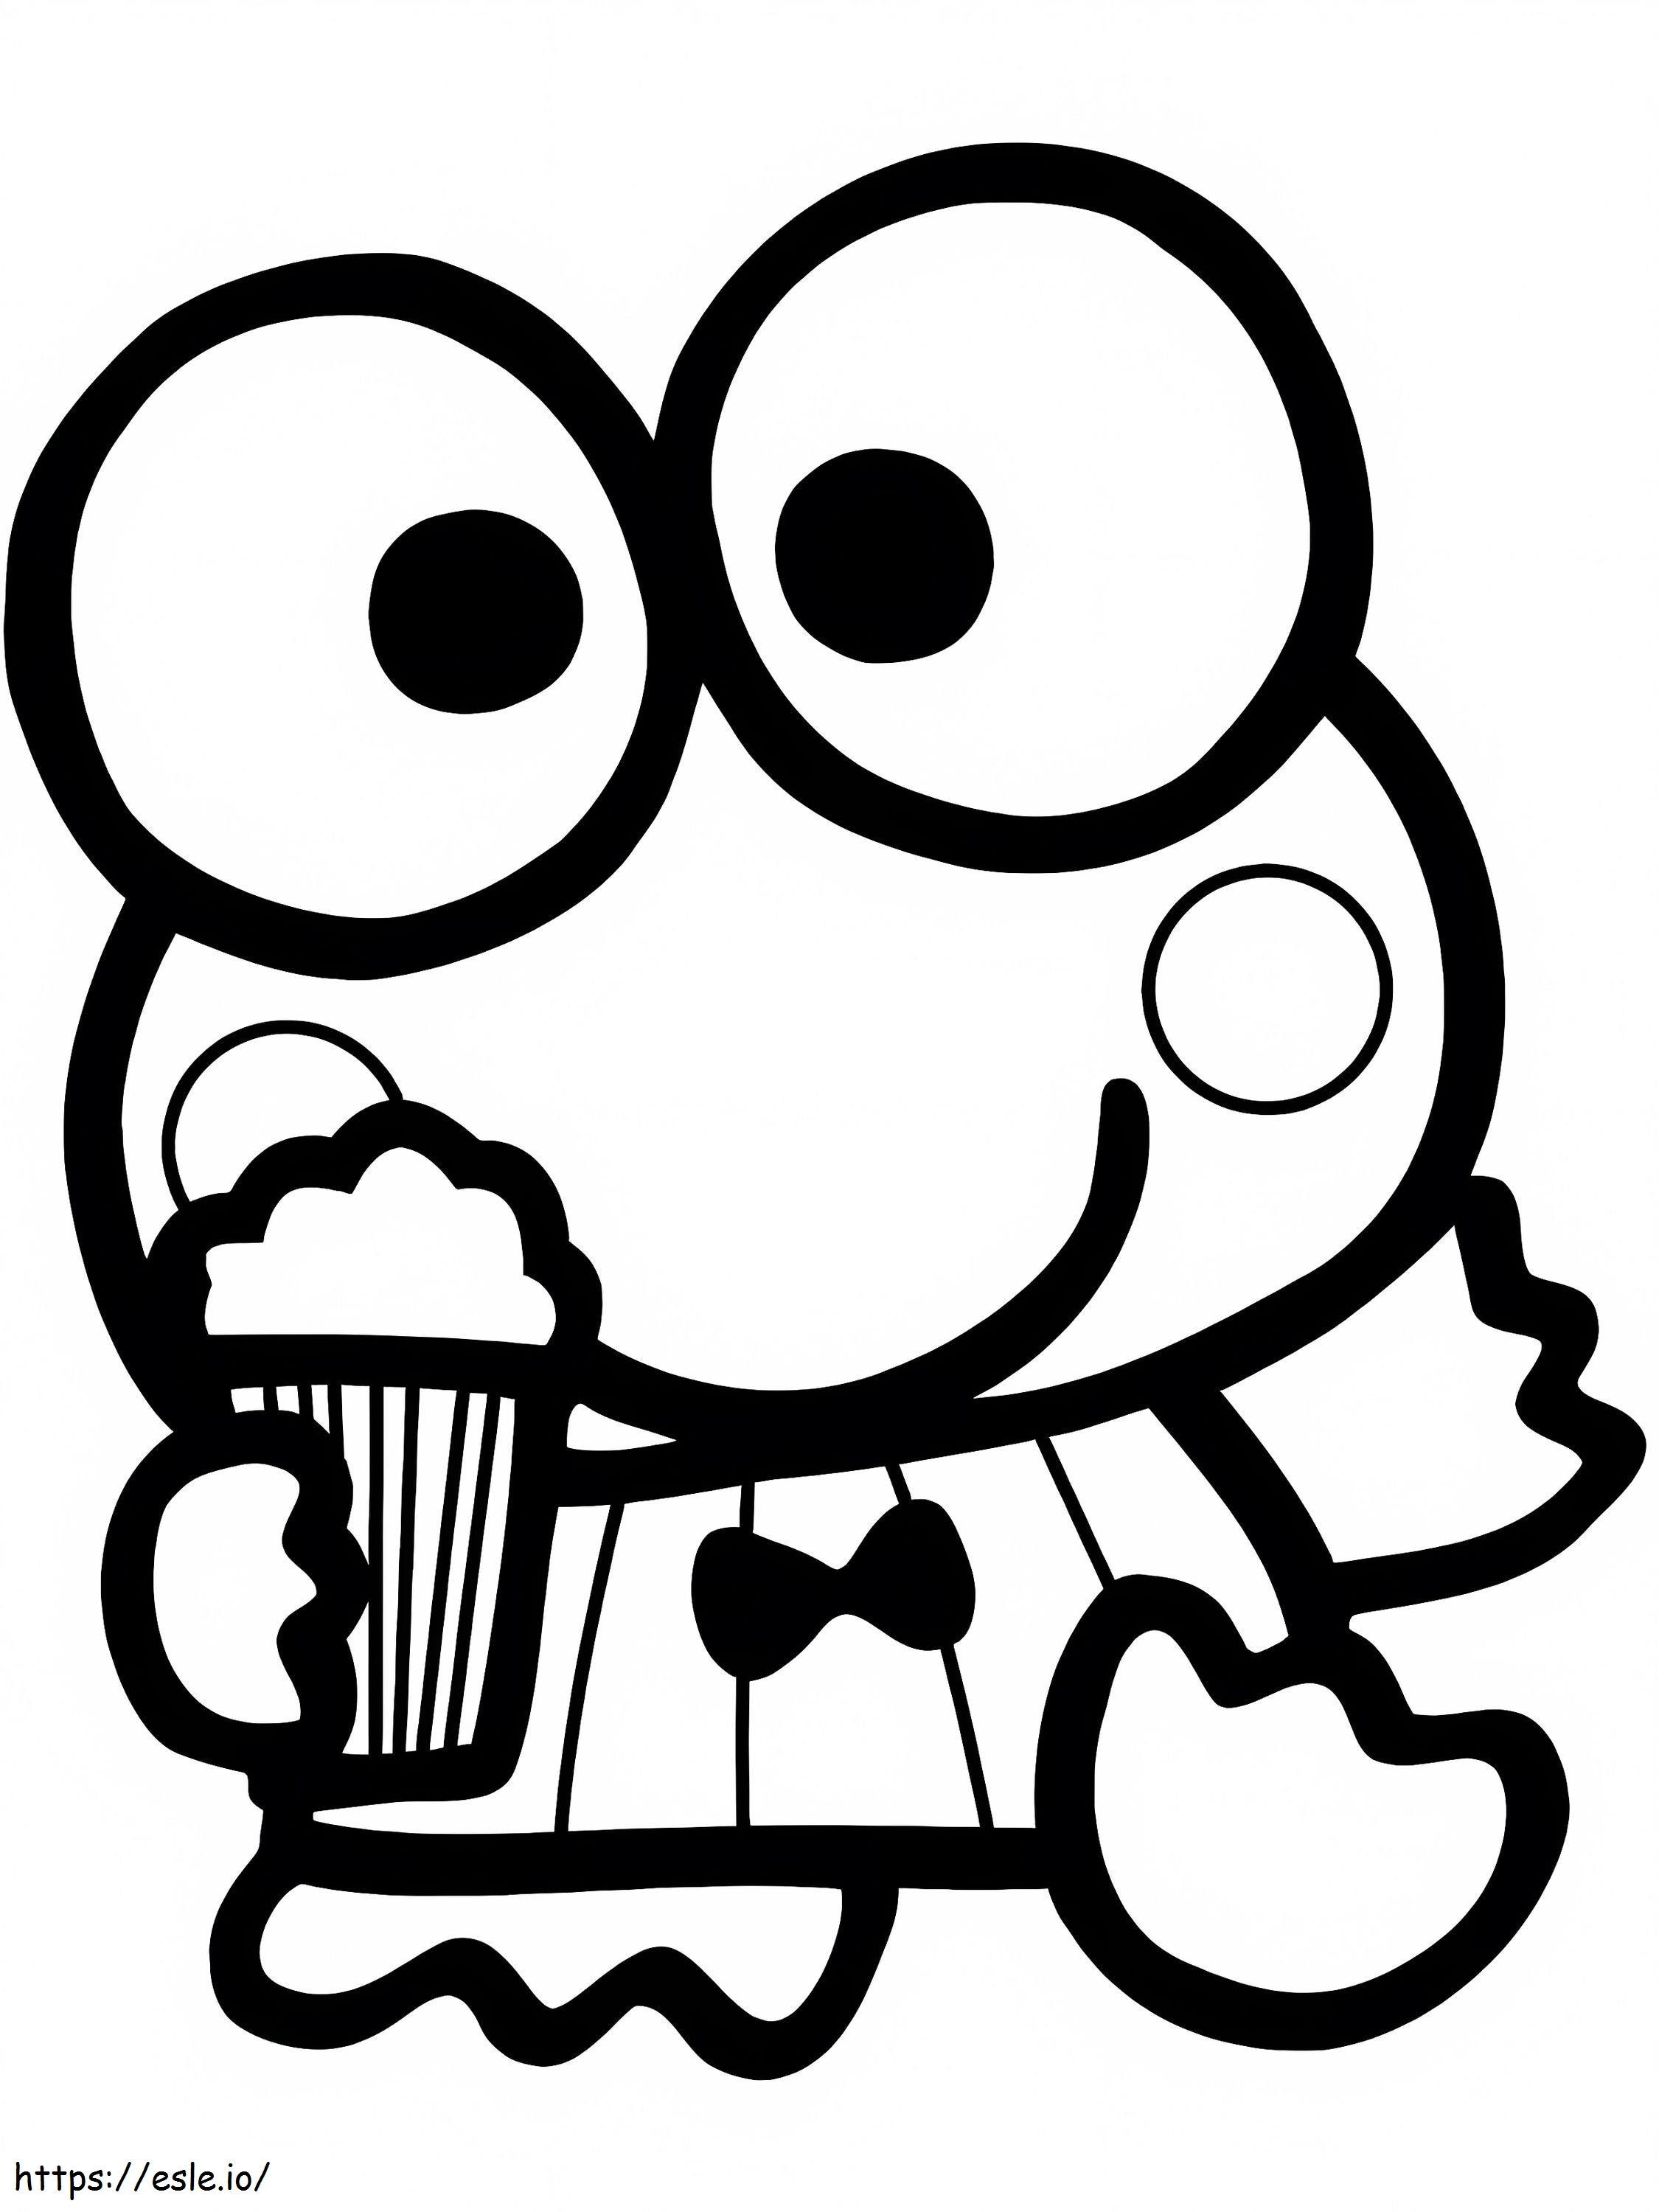 Keroppi With Popcorn coloring page